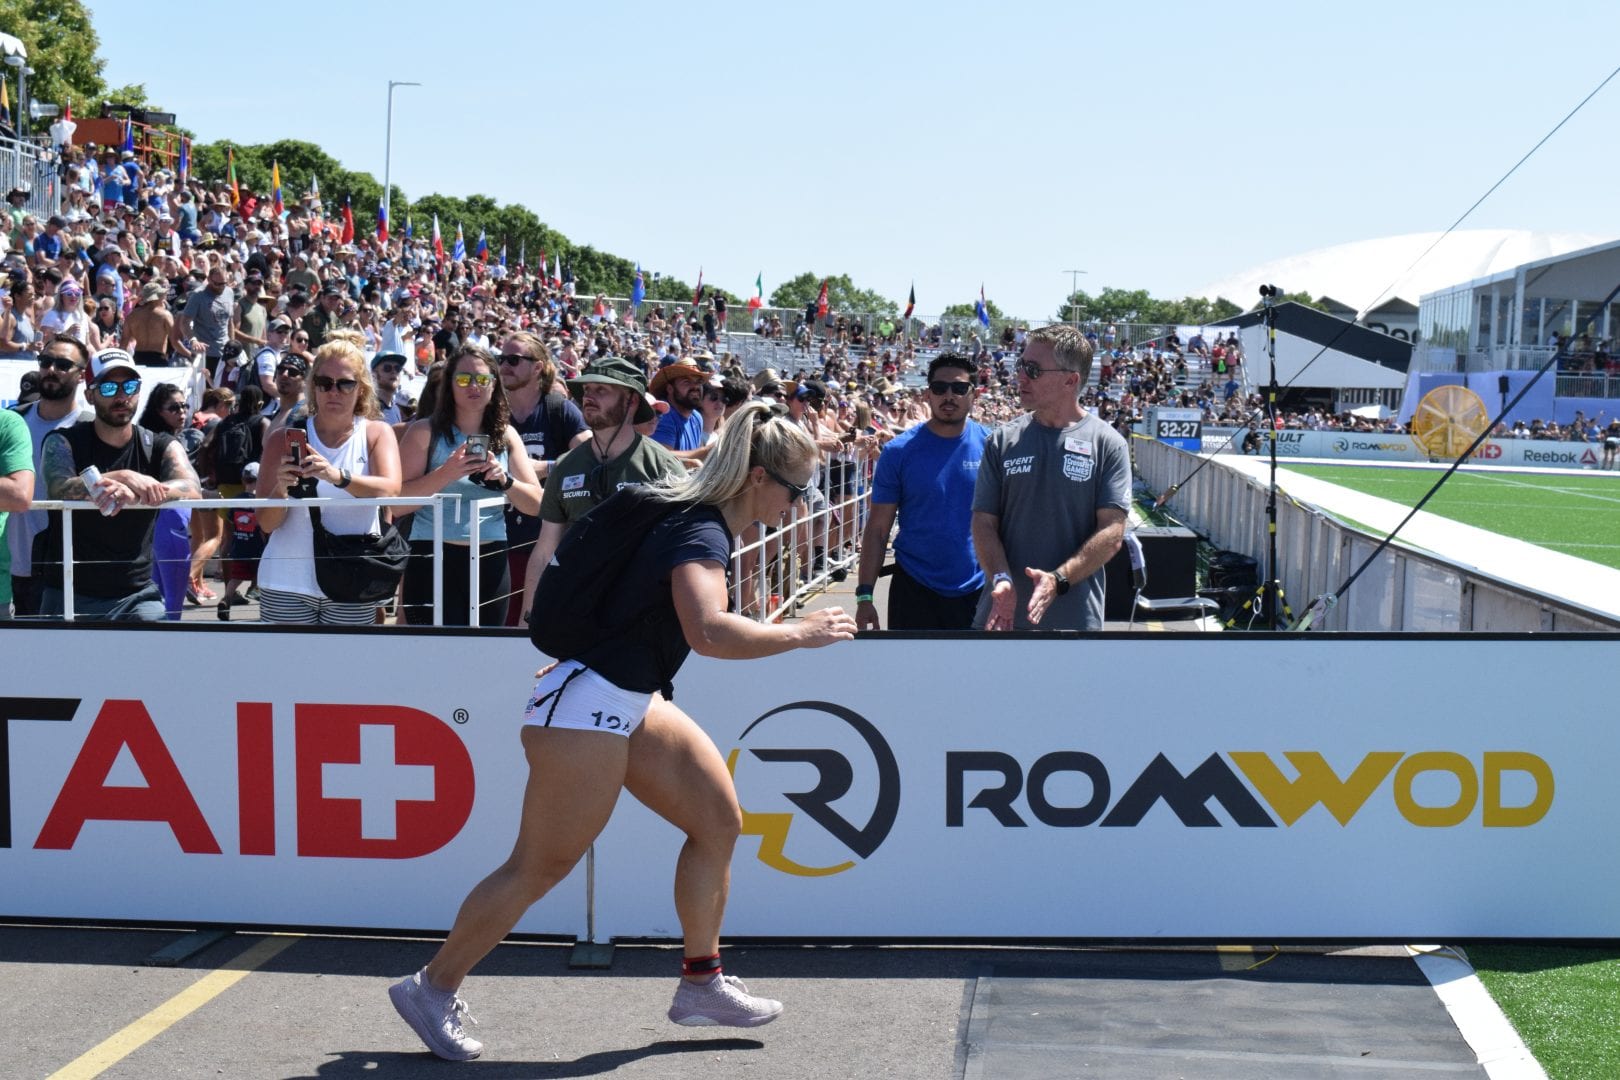 Dani Speegle completes the Ruck Run event at the 2019 CrossFit Games.